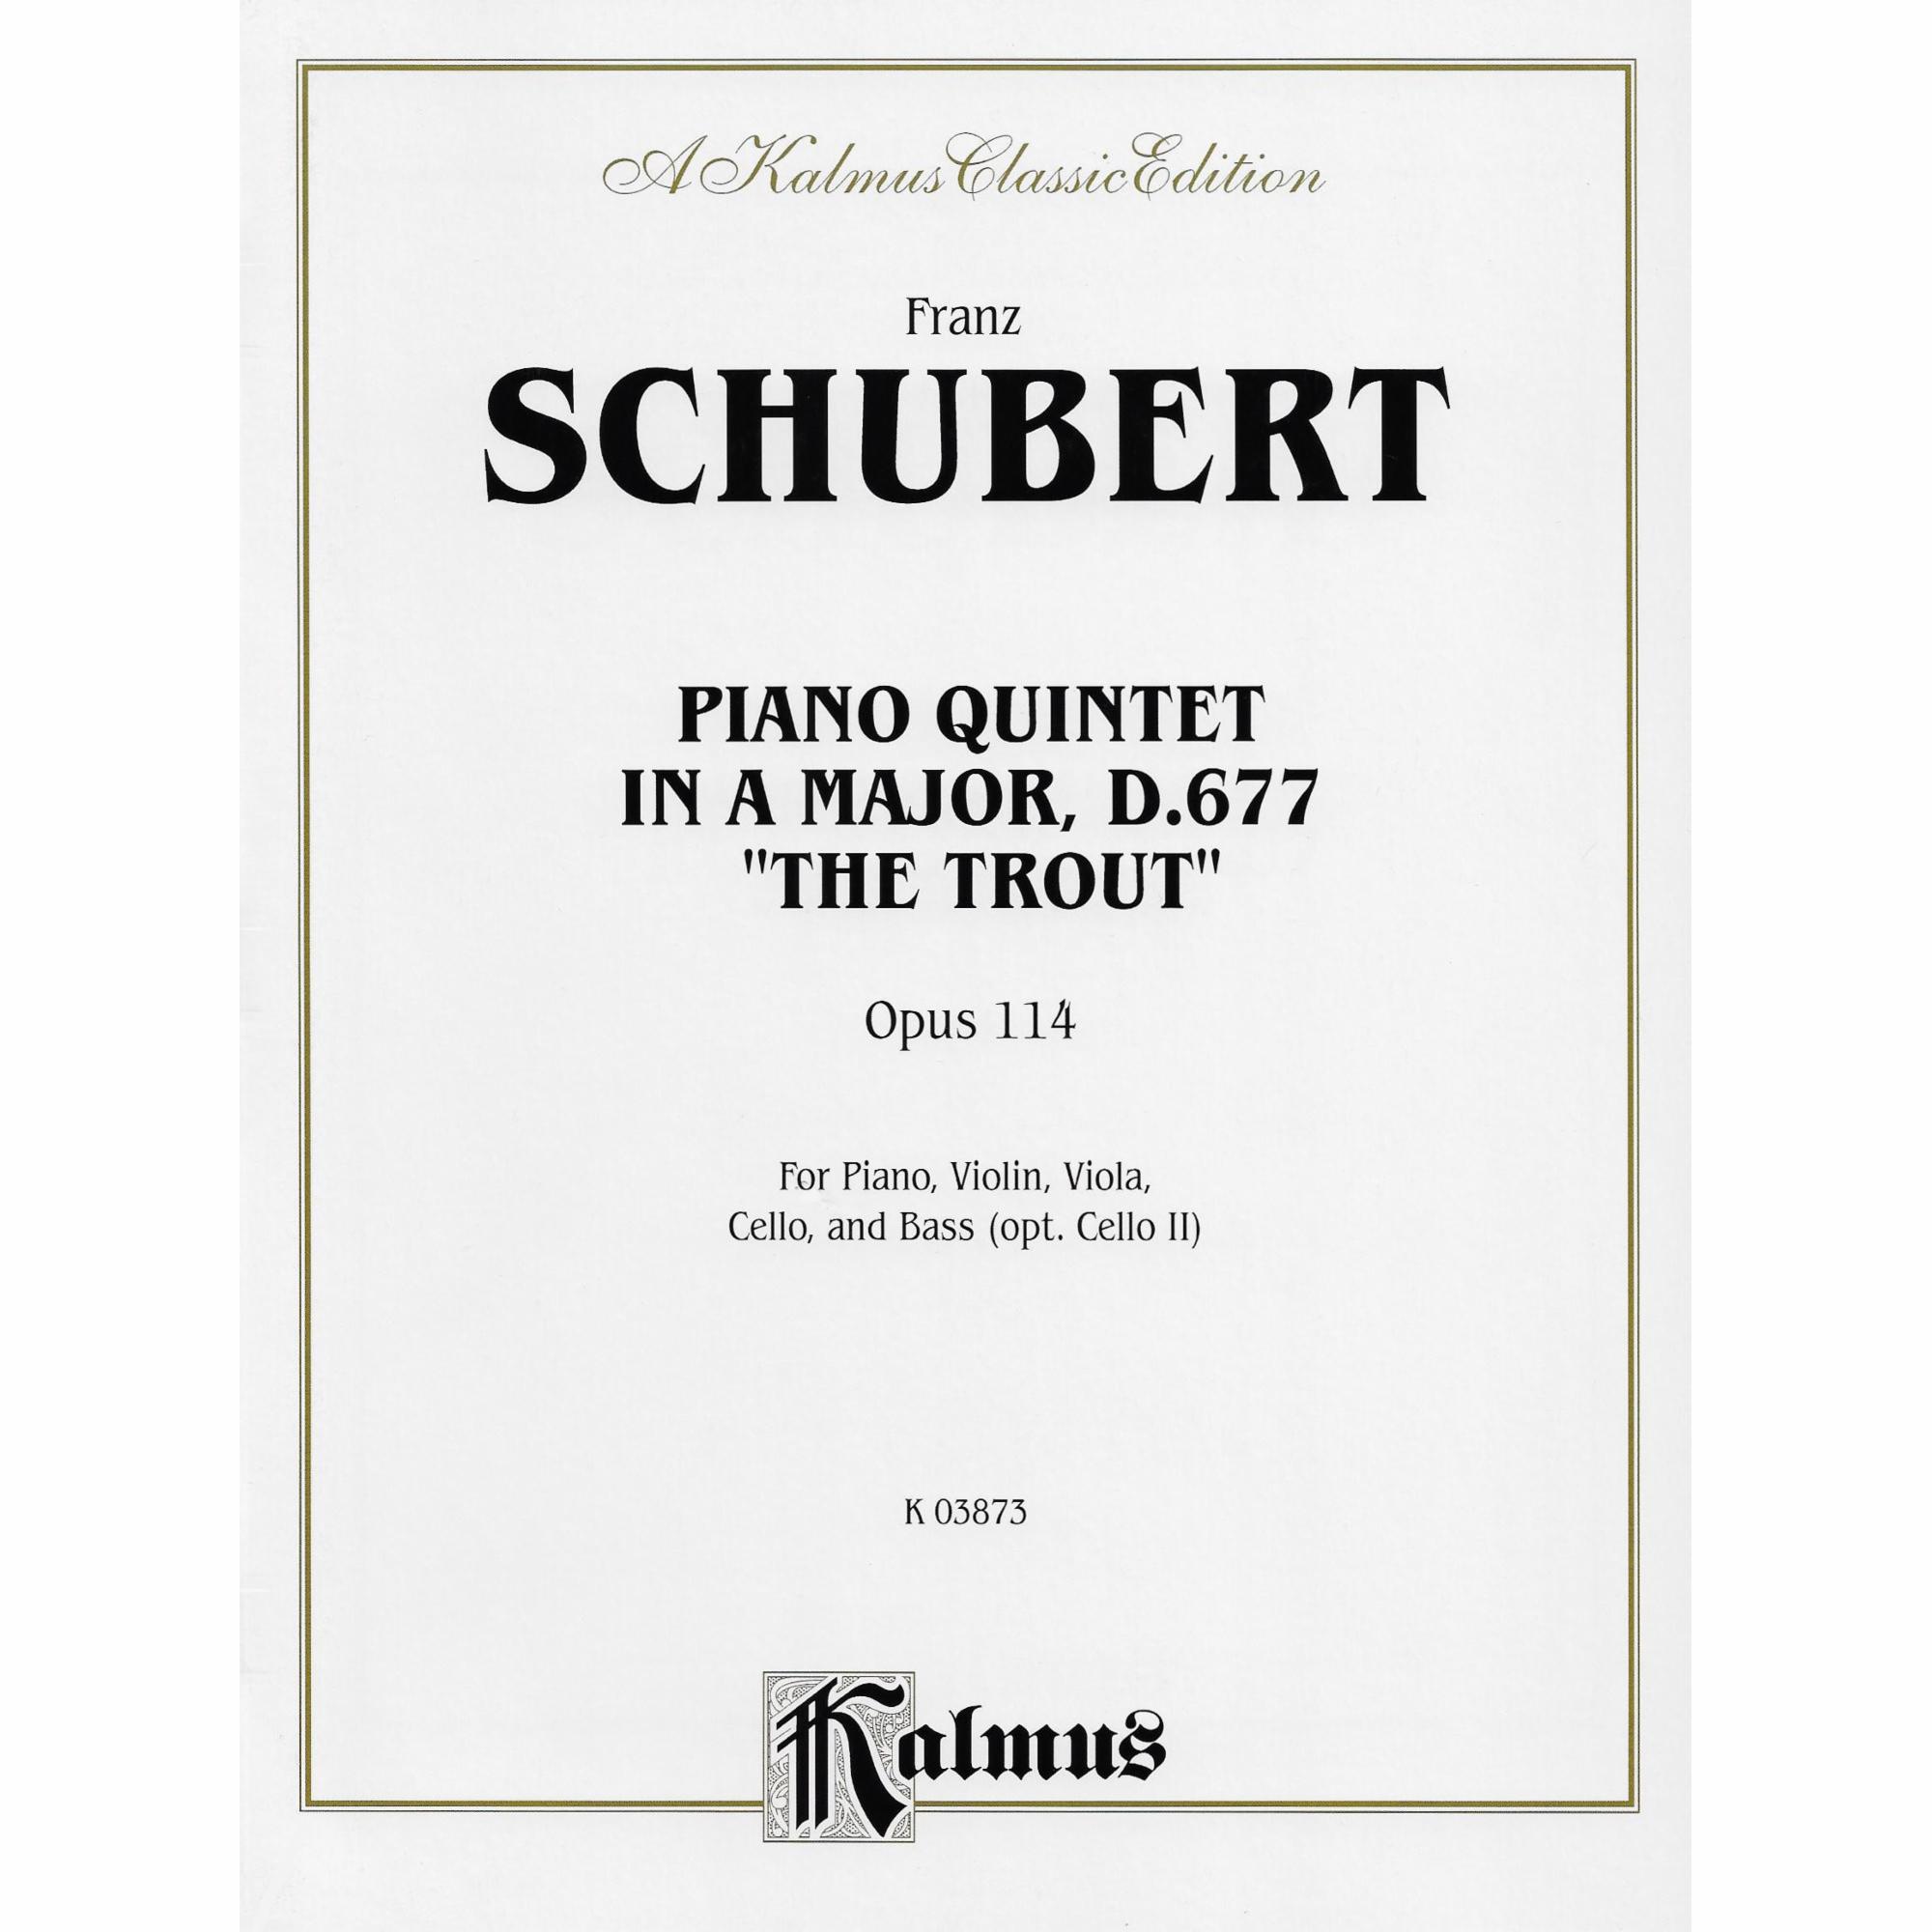 Schubert -- Piano Quintet in A Major, D. 677 (The Trout)